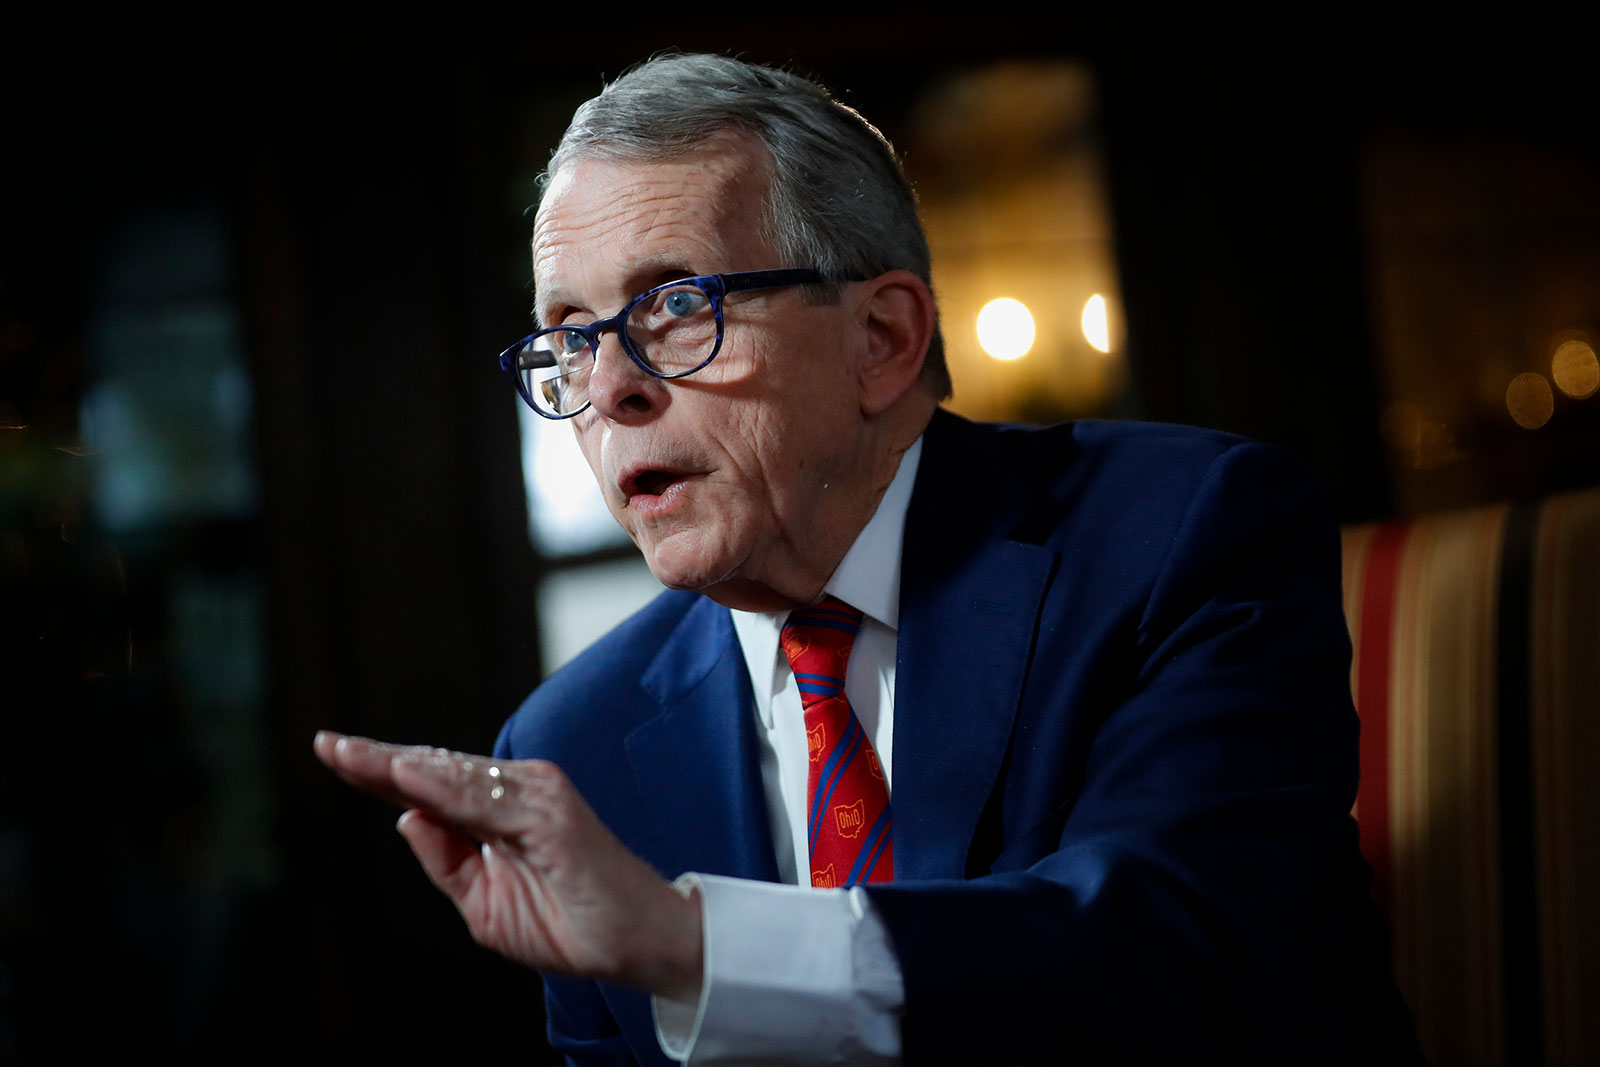 In this 2019 file photo, Ohio Gov. Mike DeWine speaks during an interview in Columbus.